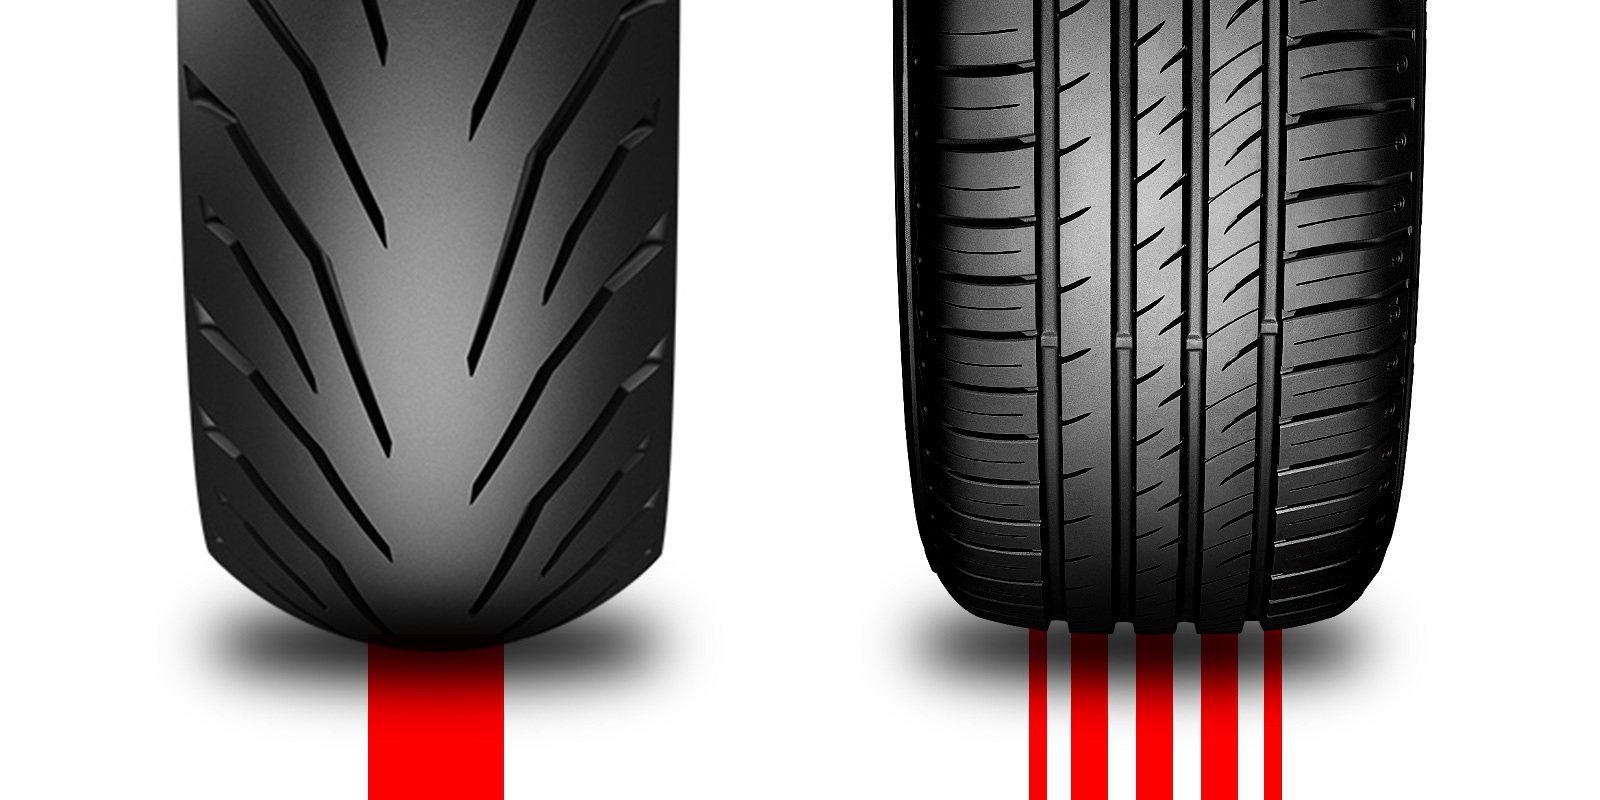 Width of a motorcycle rear tire contact patch versus the contact patch of a car tire